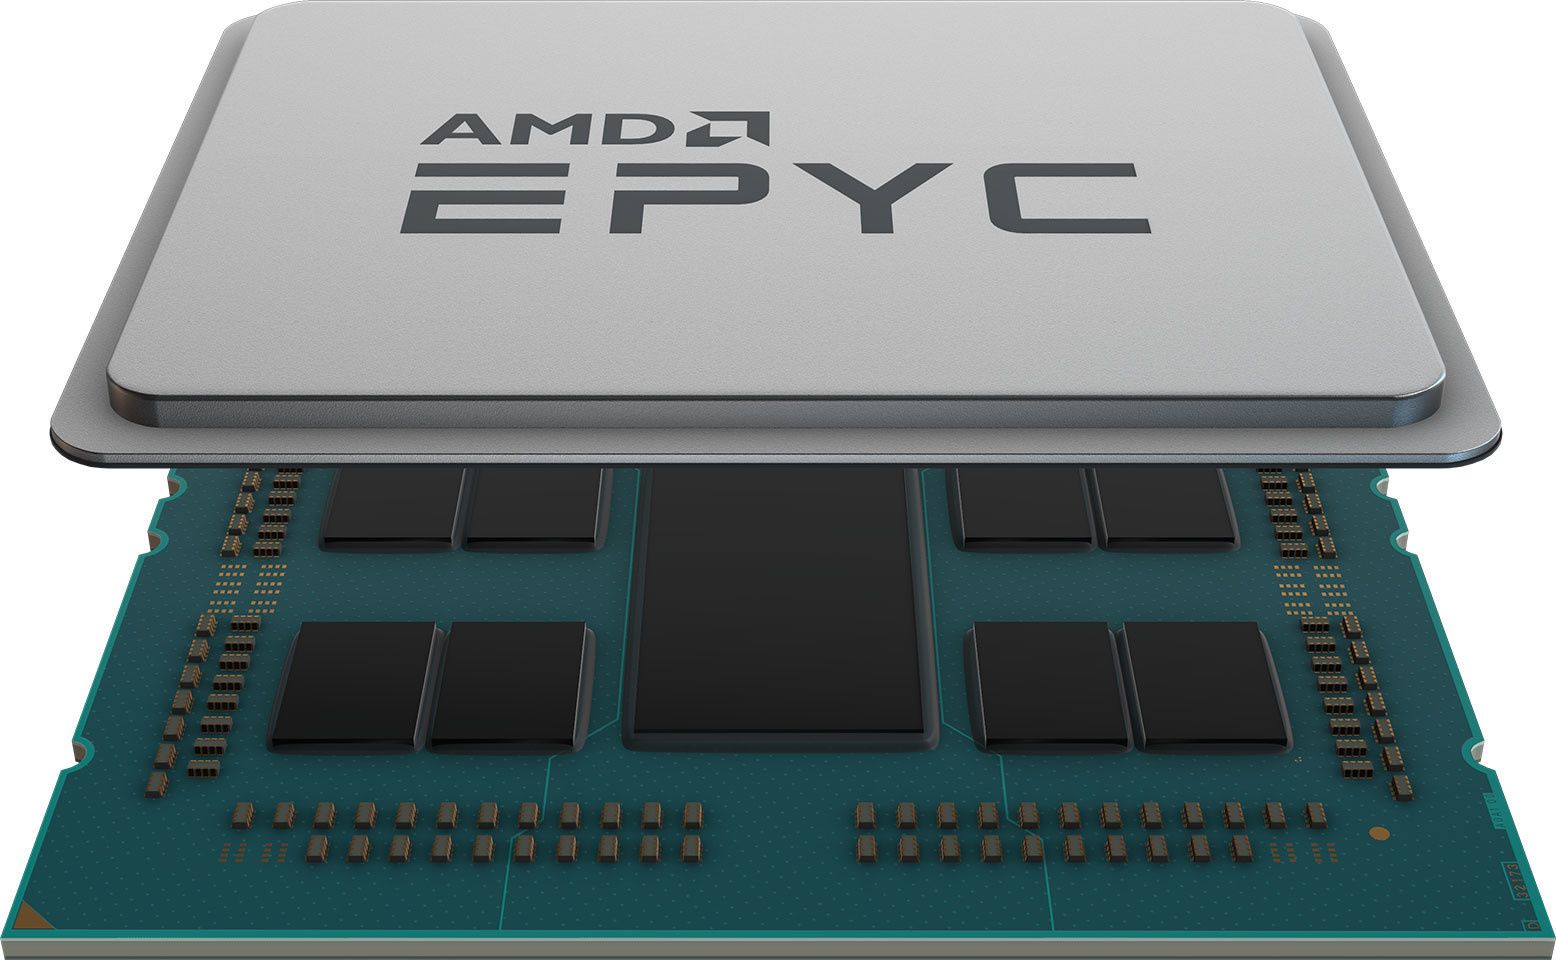 AMD Epyc chips outperformed Intel Xeon in Geekbench by one-fourth the price